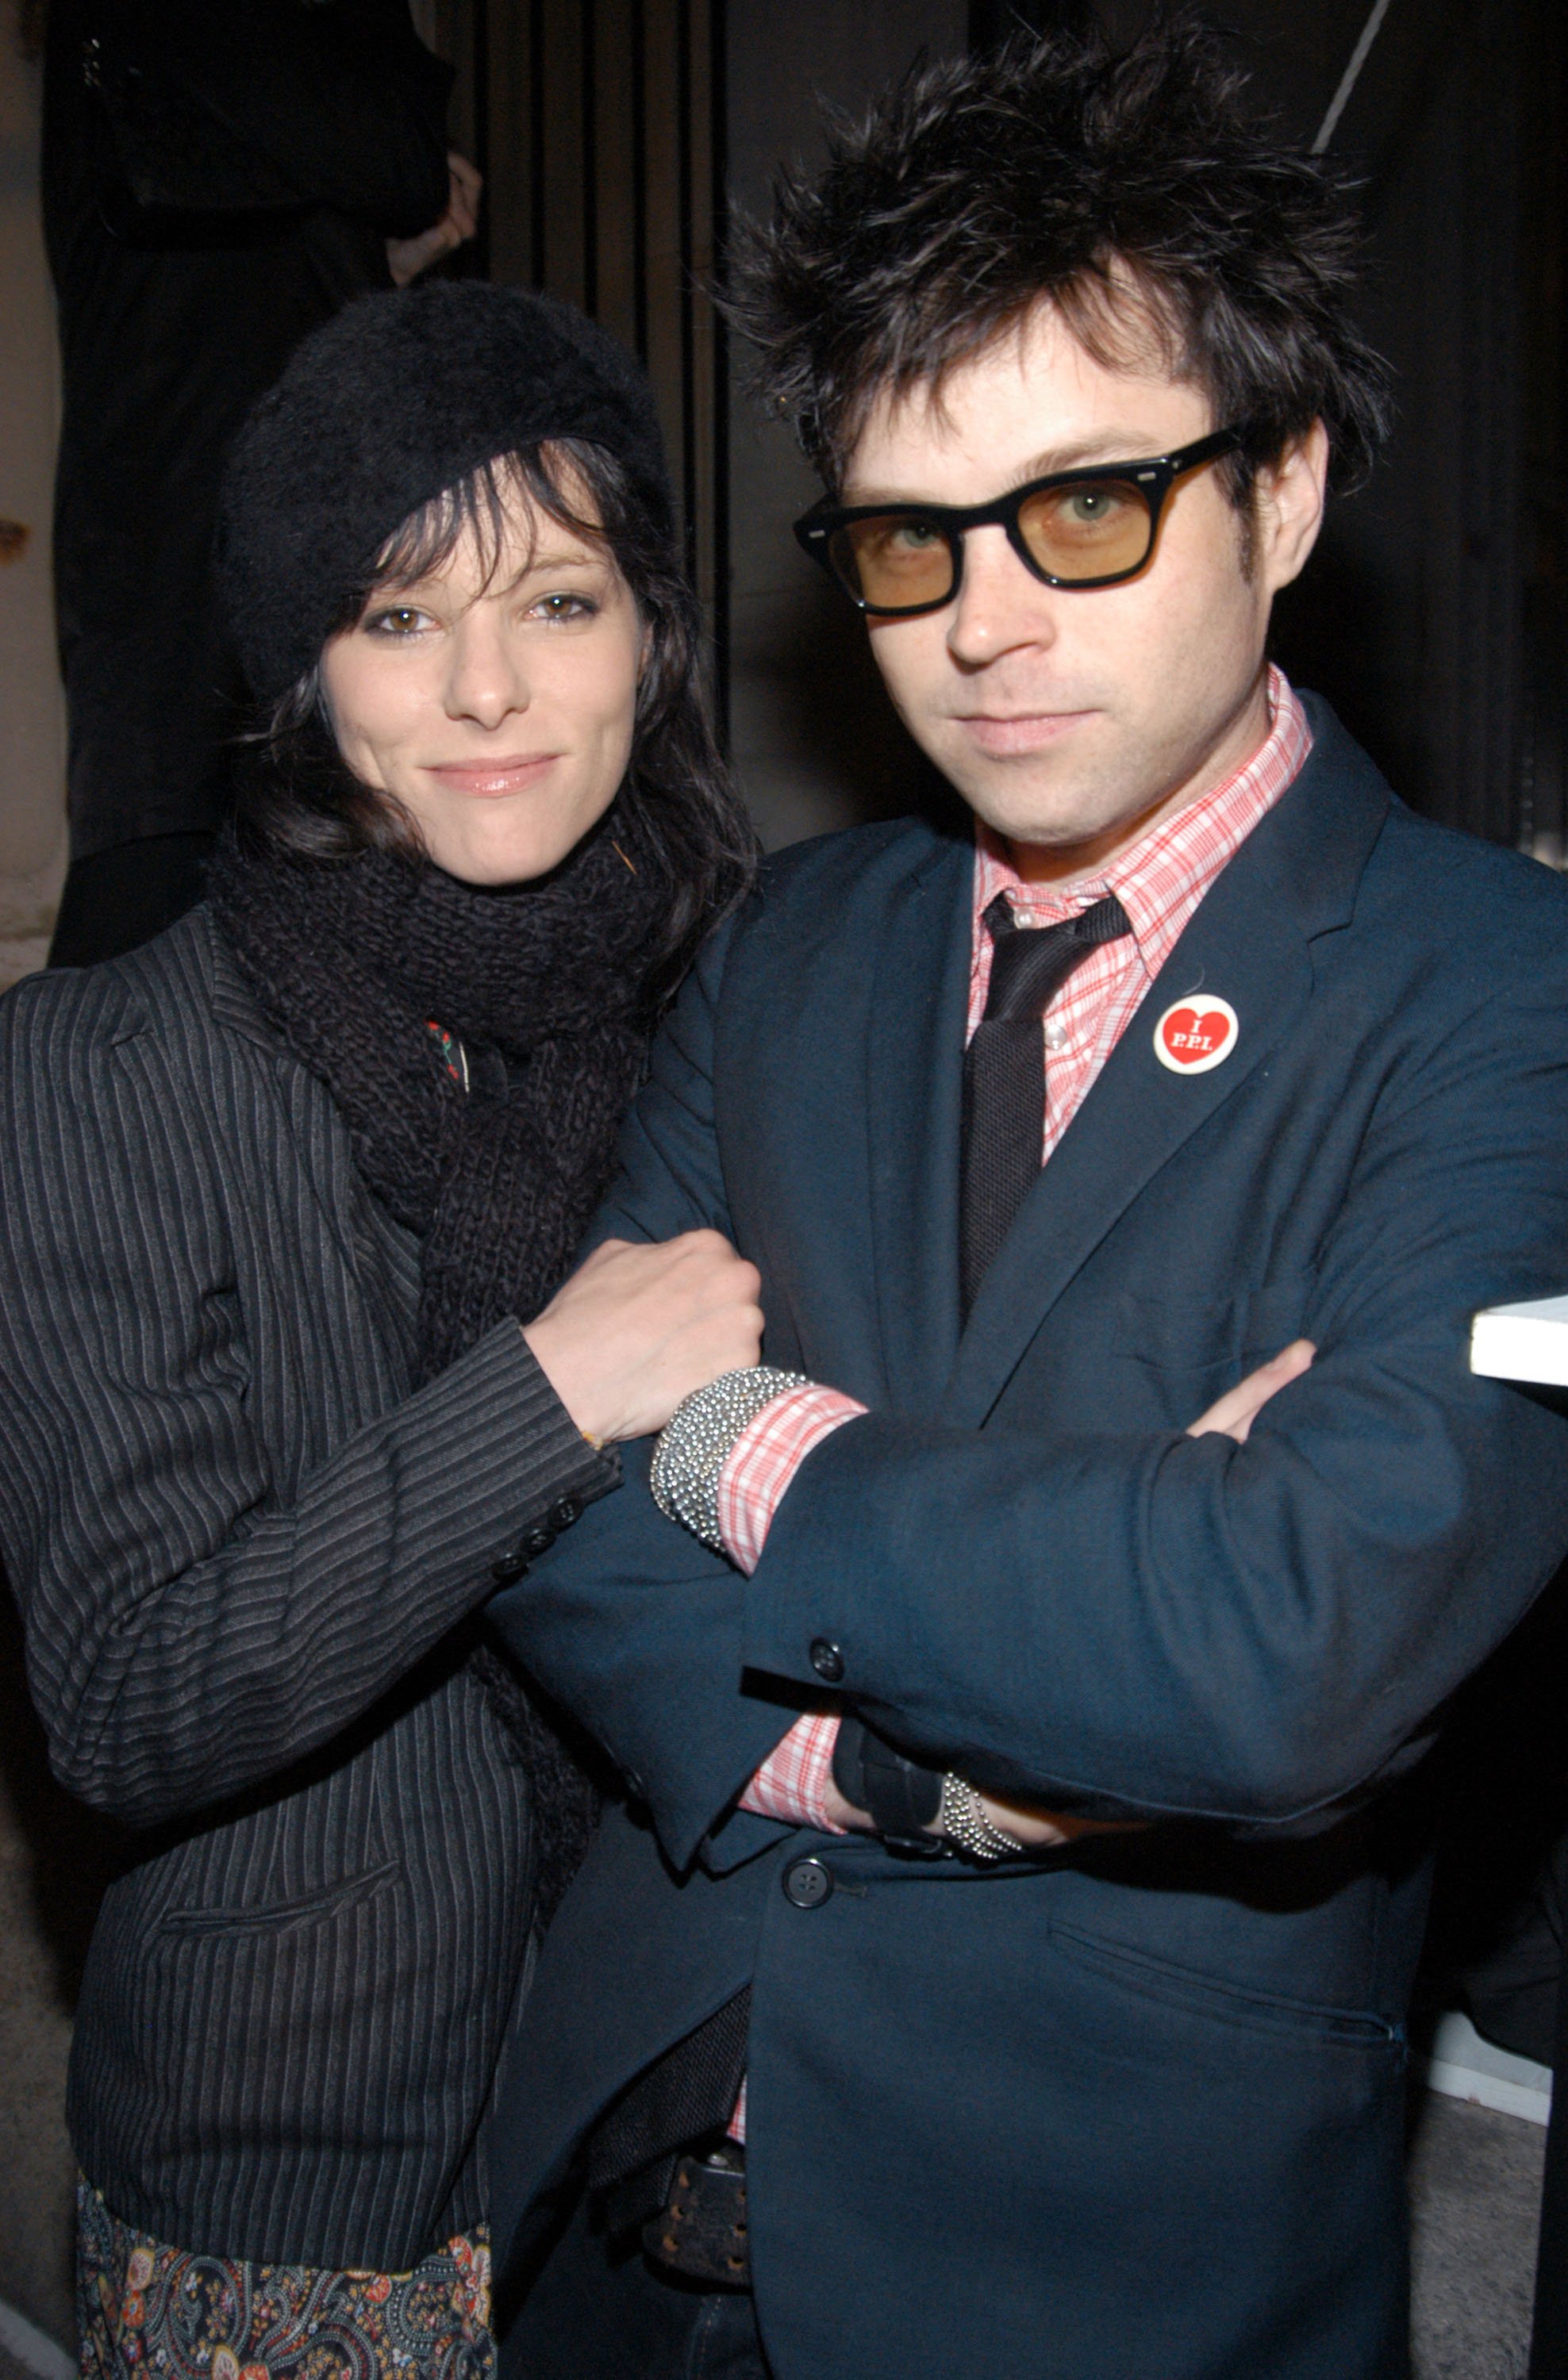 Parker Posey and Ryan Adams at “The Rolling Stones’” celebration of the Launch of "Four Flicks" in New York City. | Source: Getty Images